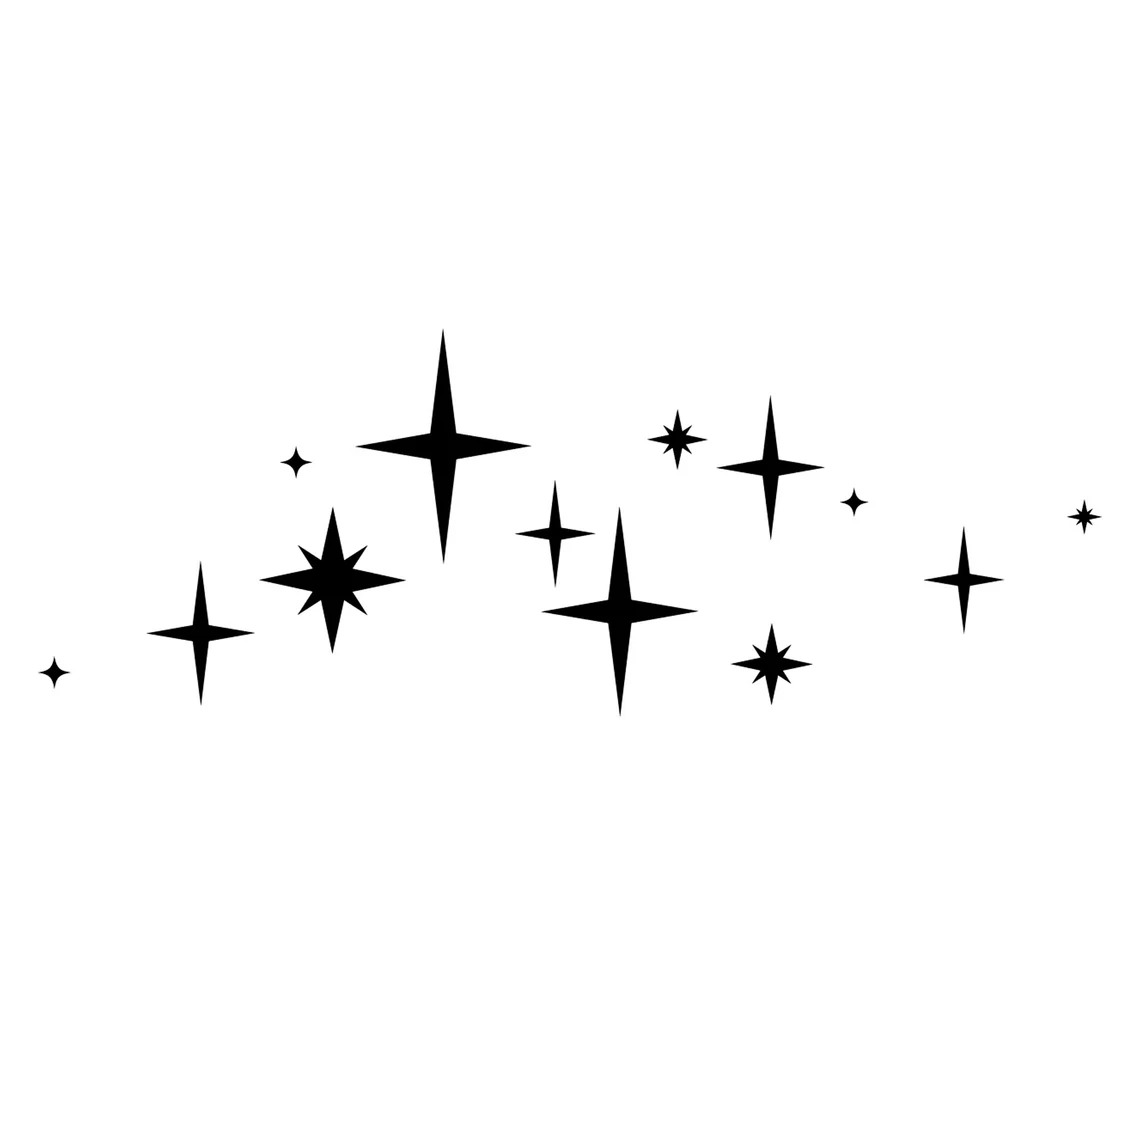 The stars are black on a white background.